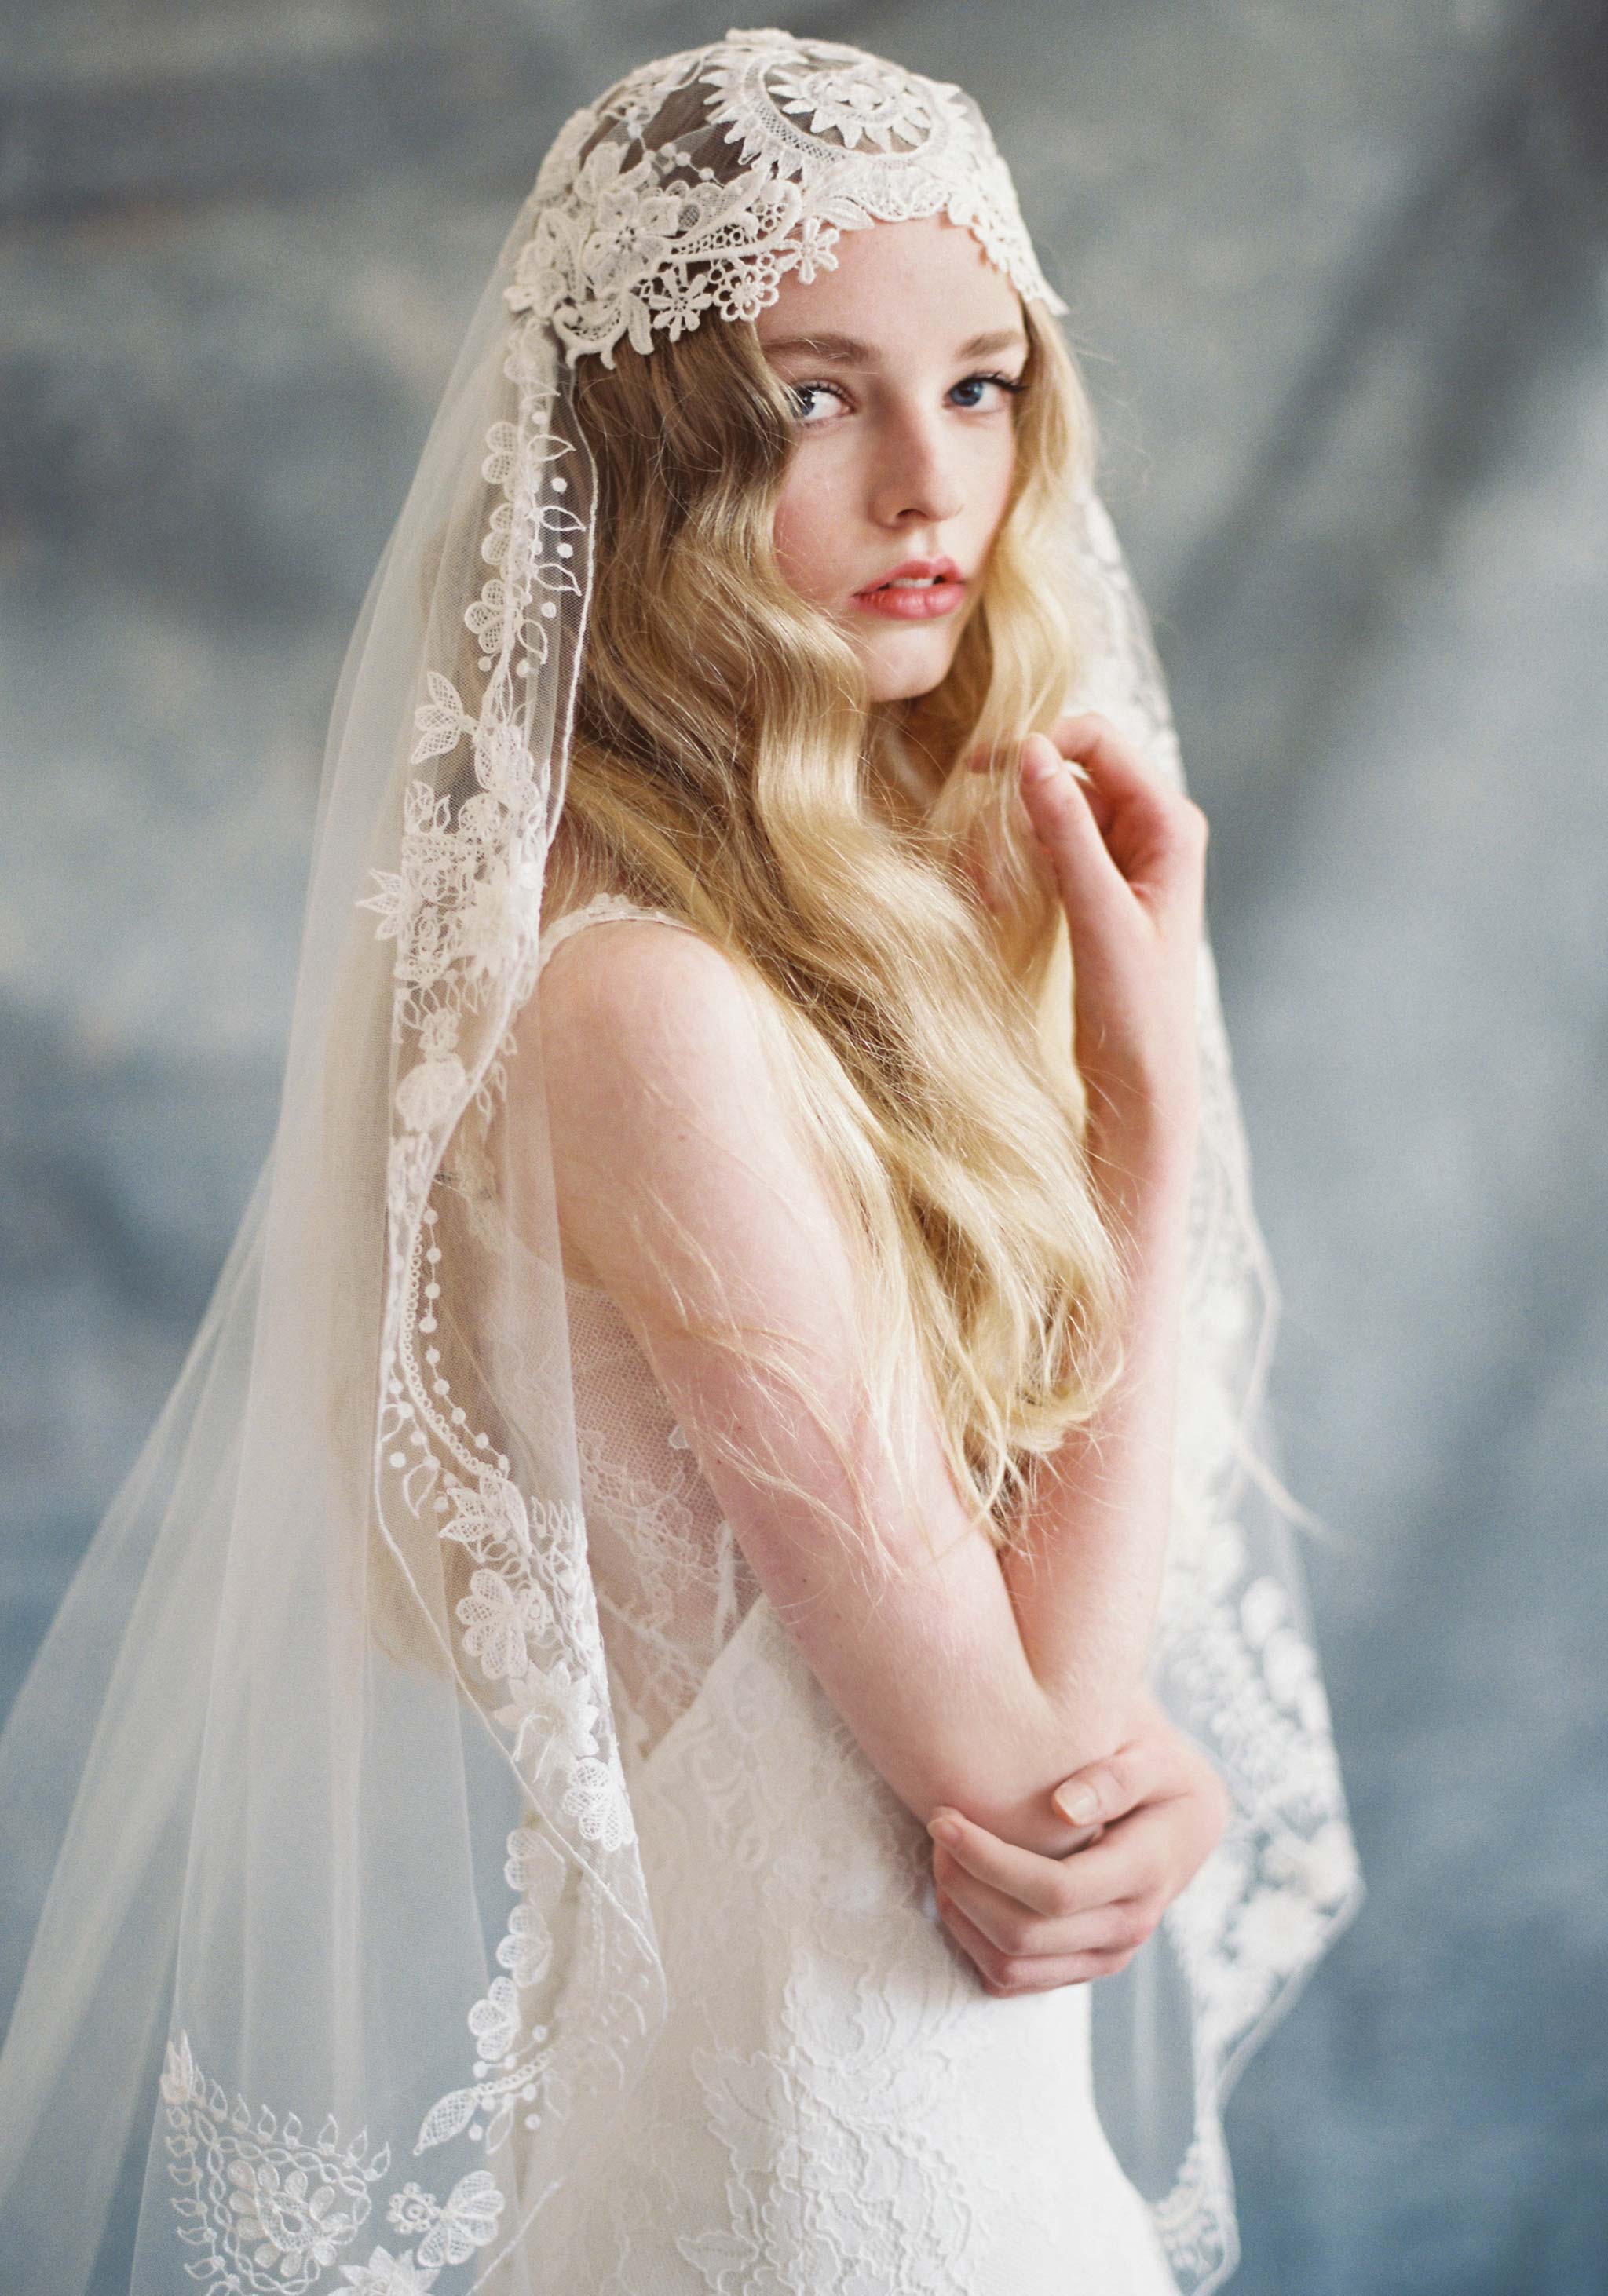 12 Wedding Veil Styles & Lengths, From Shortest to Longest